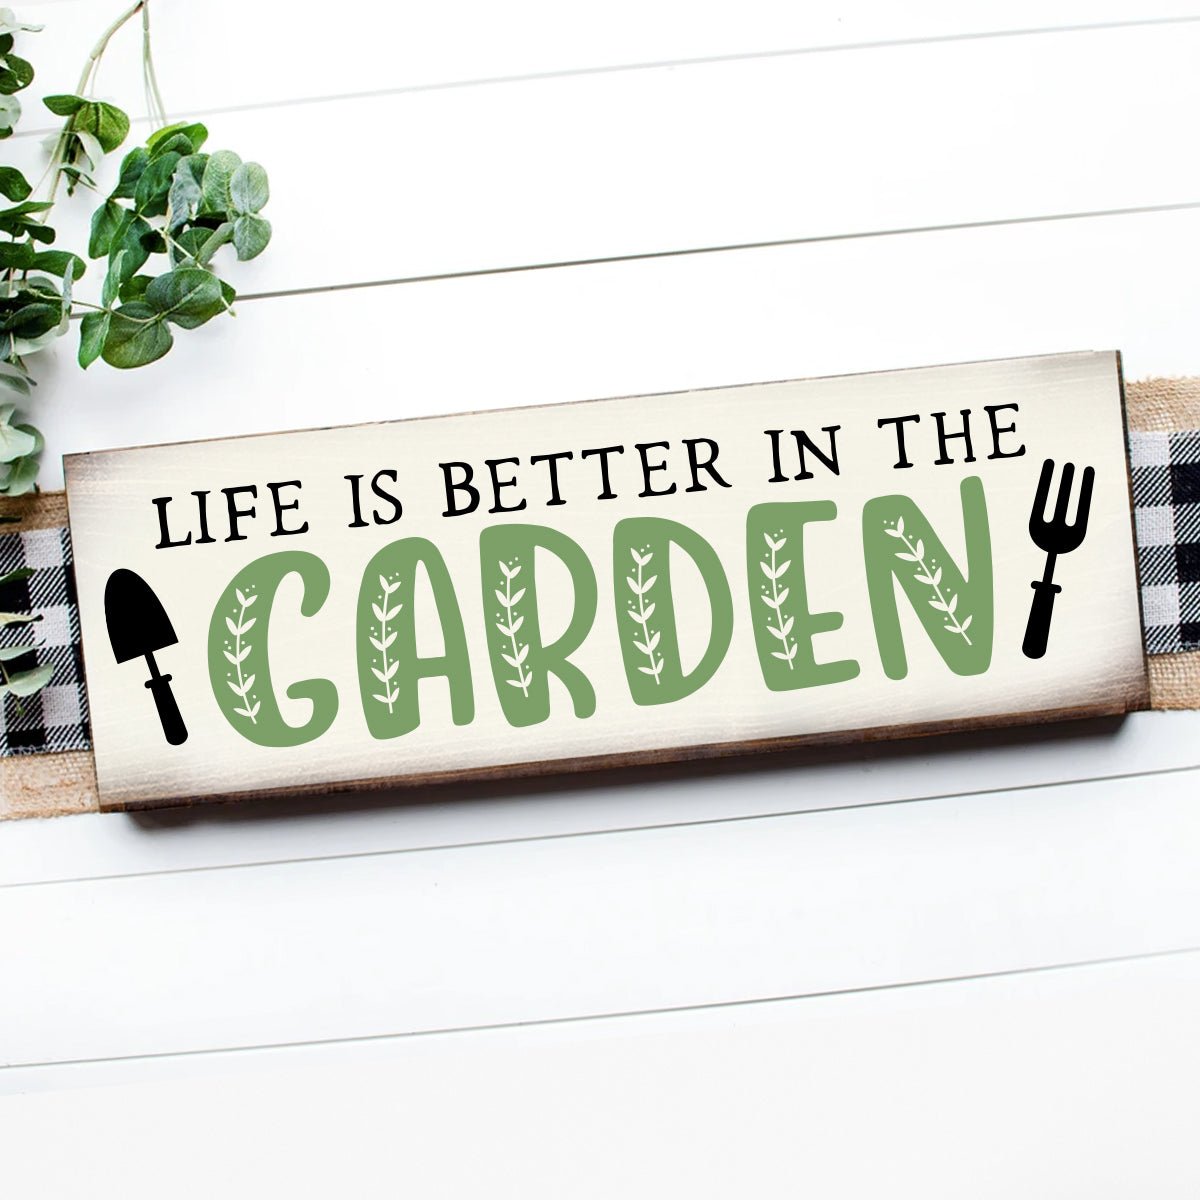 LIFE IS BETTER IN THE GARDEN -LION RAMPANT PUB Nov. 28th 6:30PM